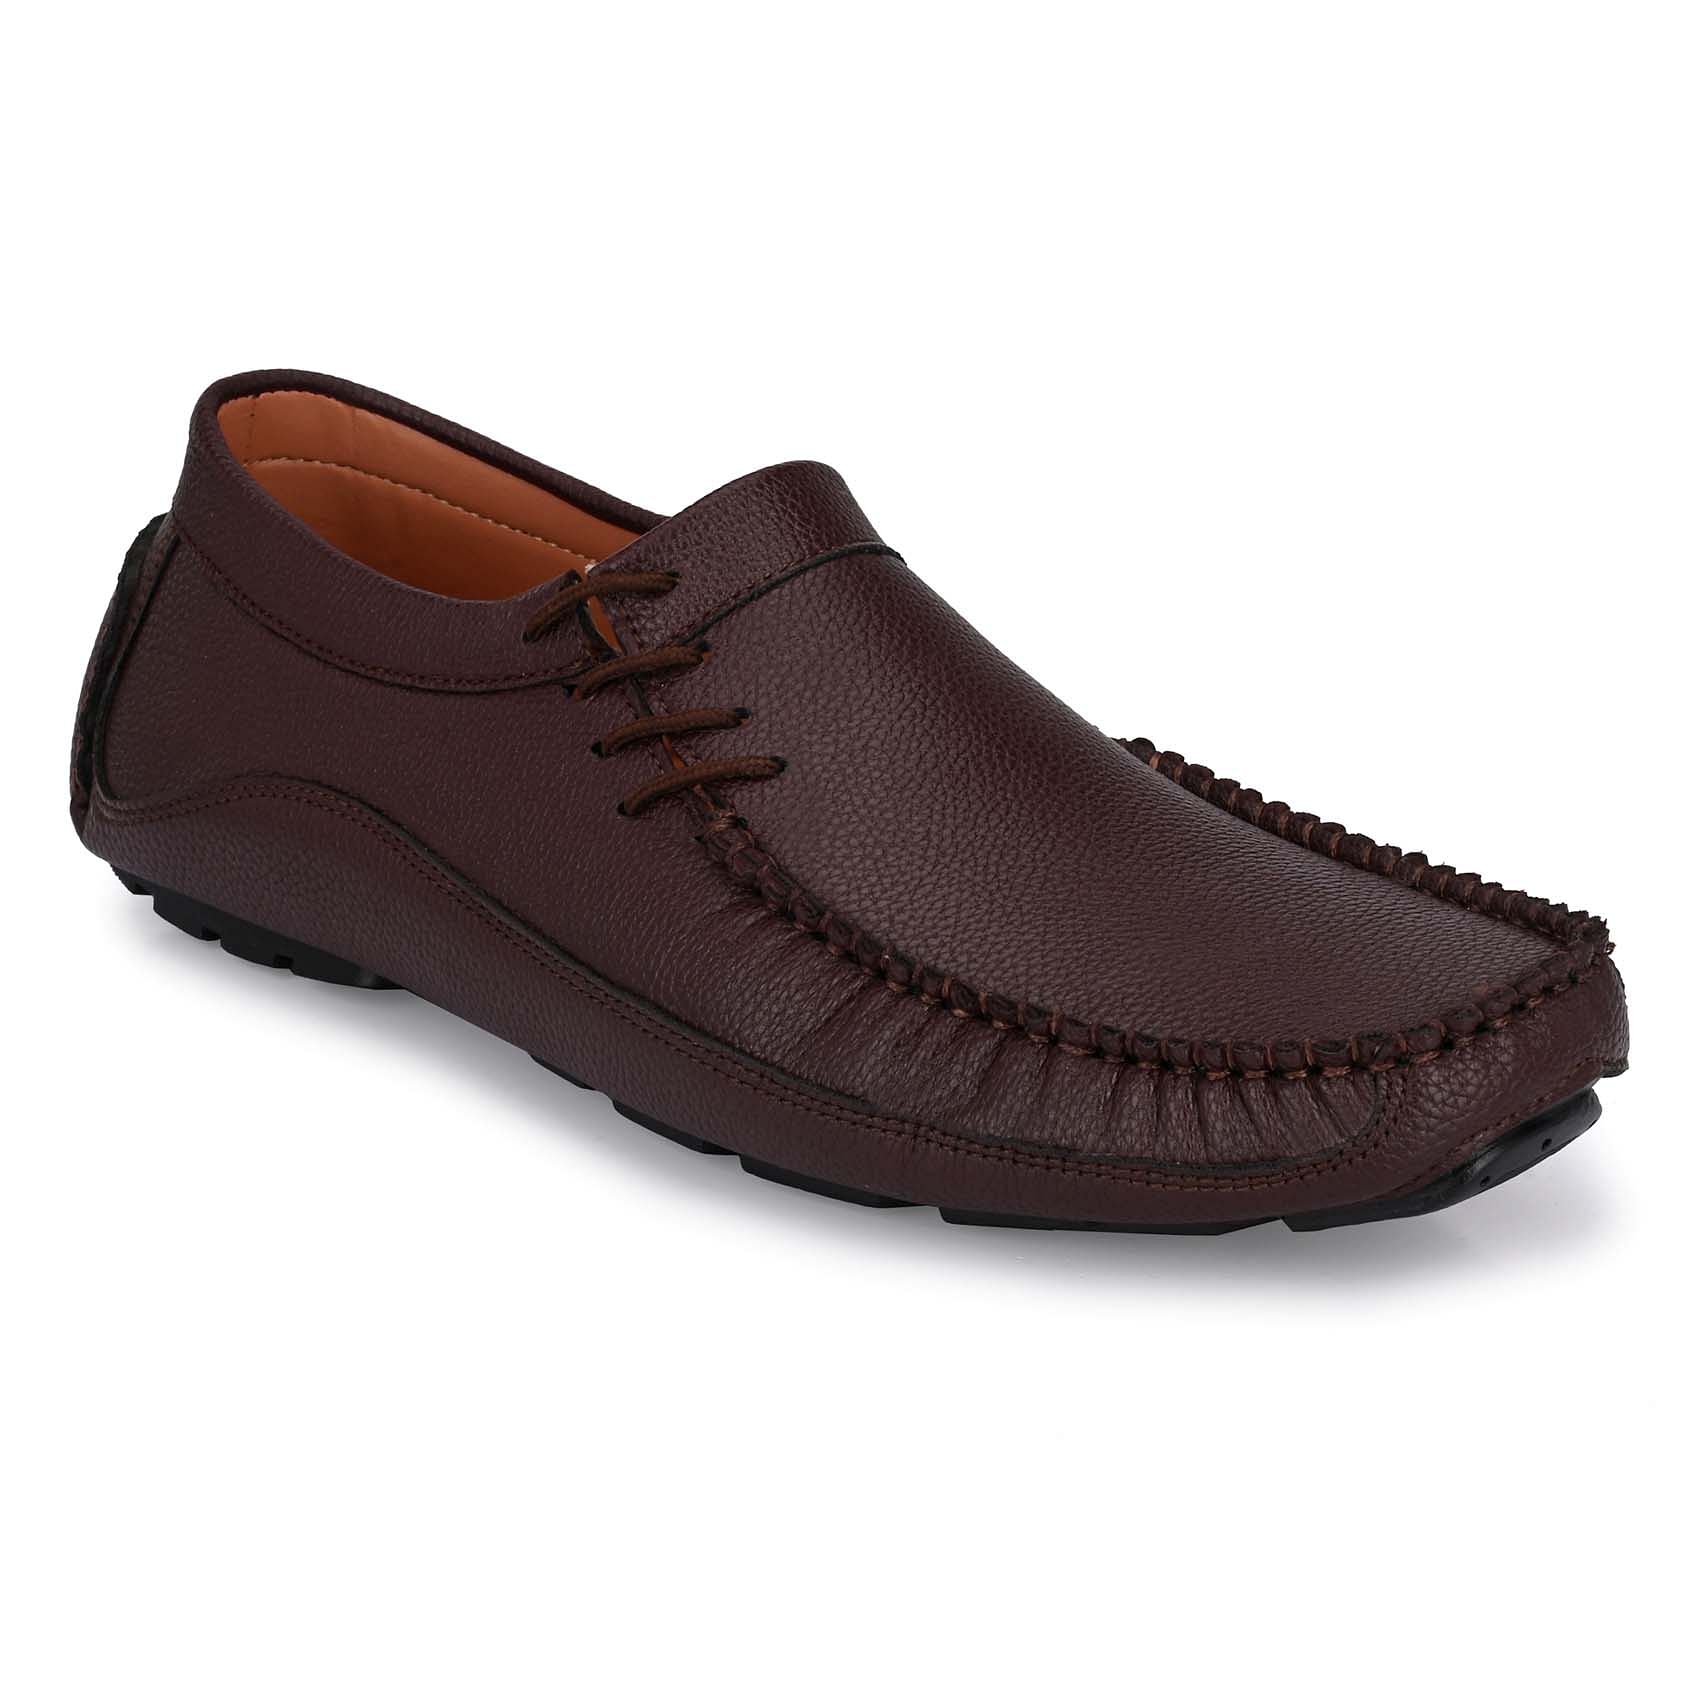 Pair-it Men's Loafers Shoes - Brown-LZ-Loafer114